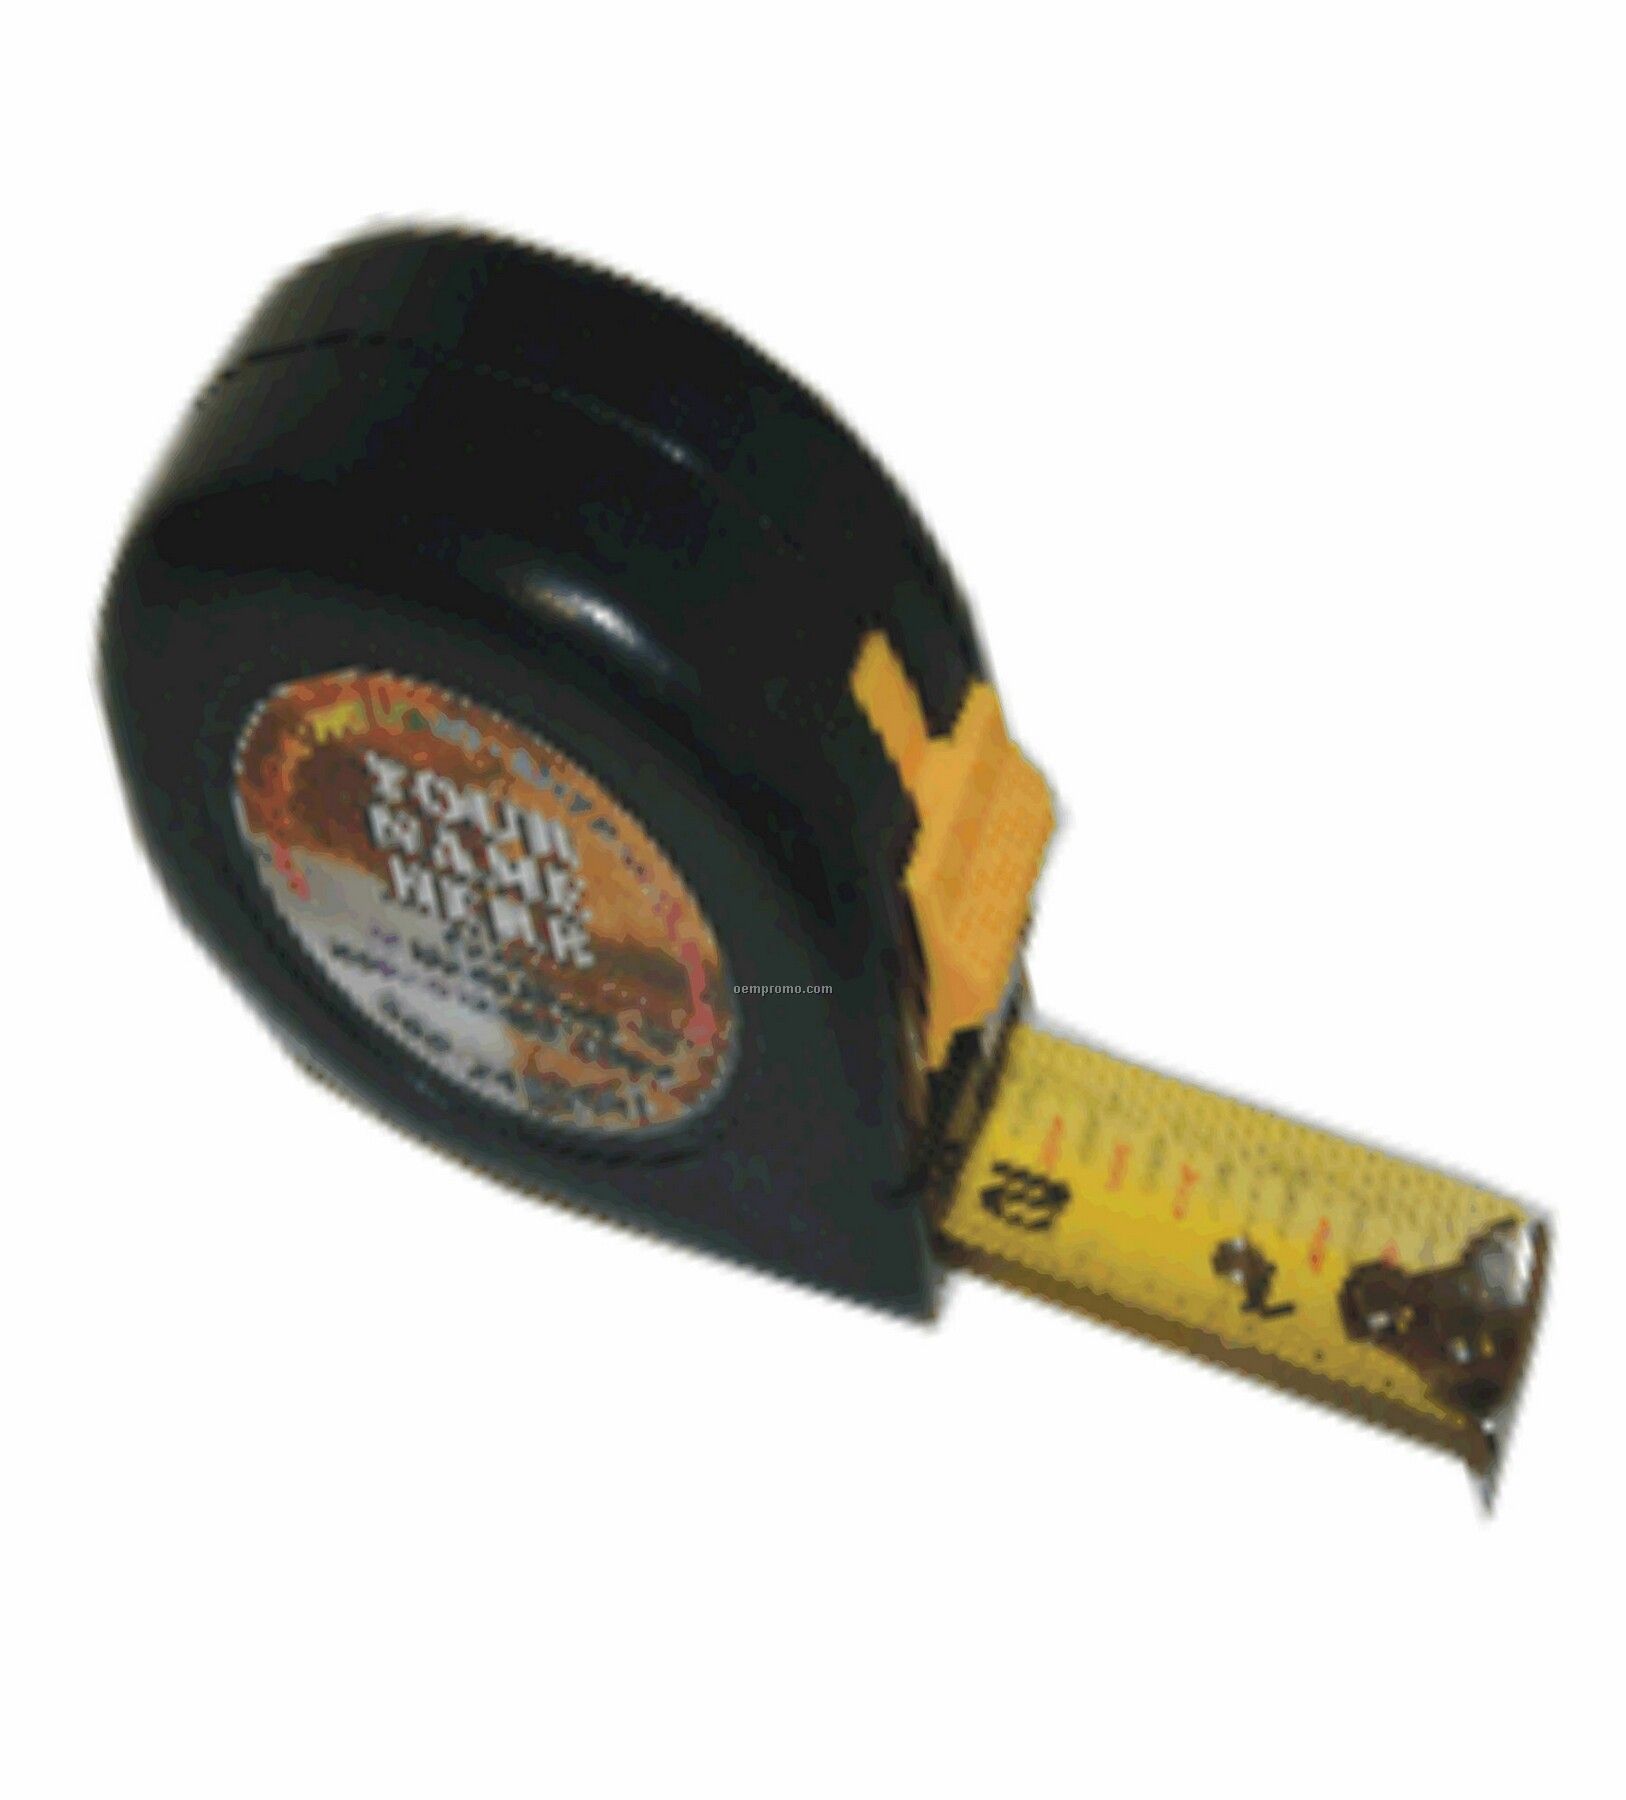 Heavy Duty Tape Measure With Solid ABS Resin Case (25' X 1